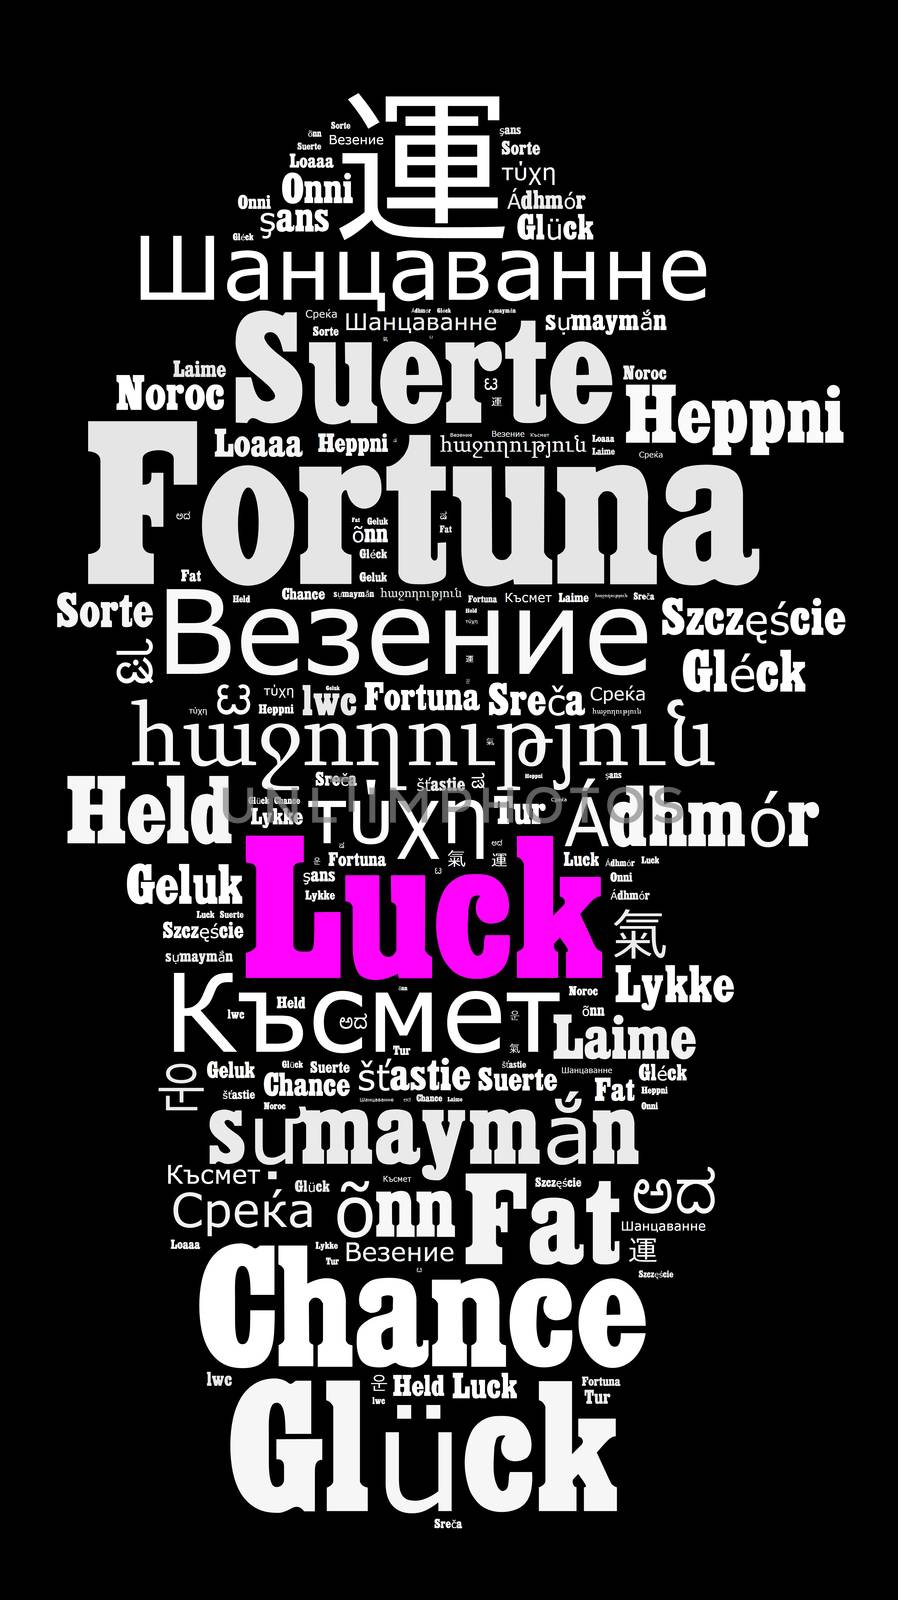 Word Luck in different languages word cloud concept